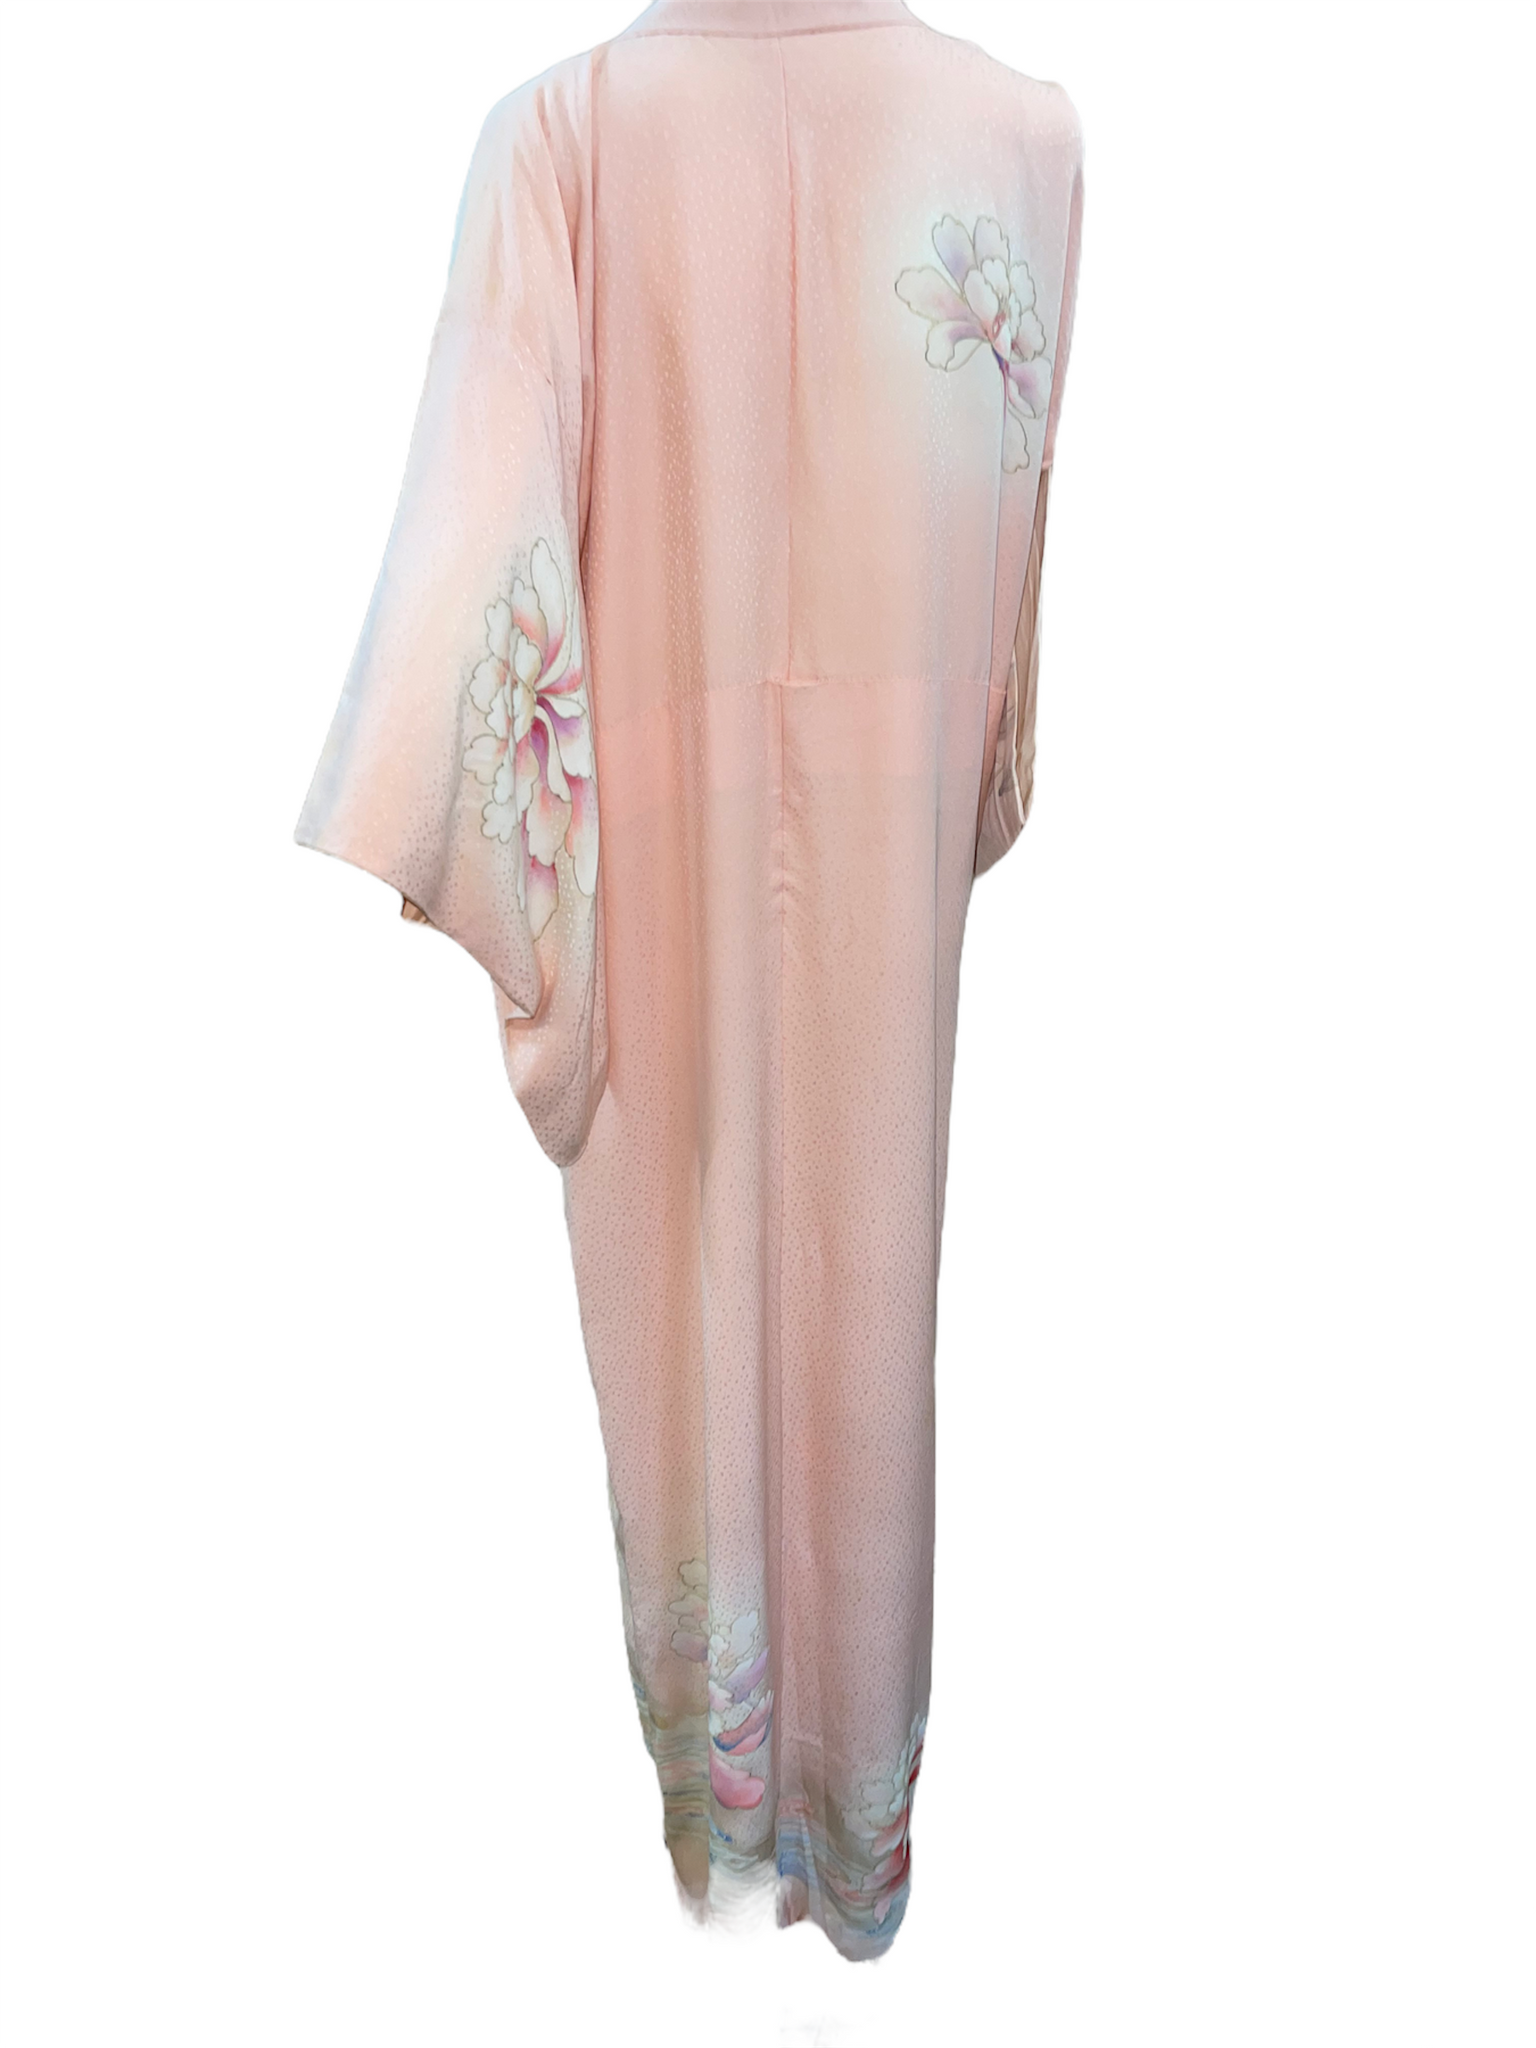 Japanese 20th Century Pale Pink Silk Hand Painted Kimono  BACK 3 of 7